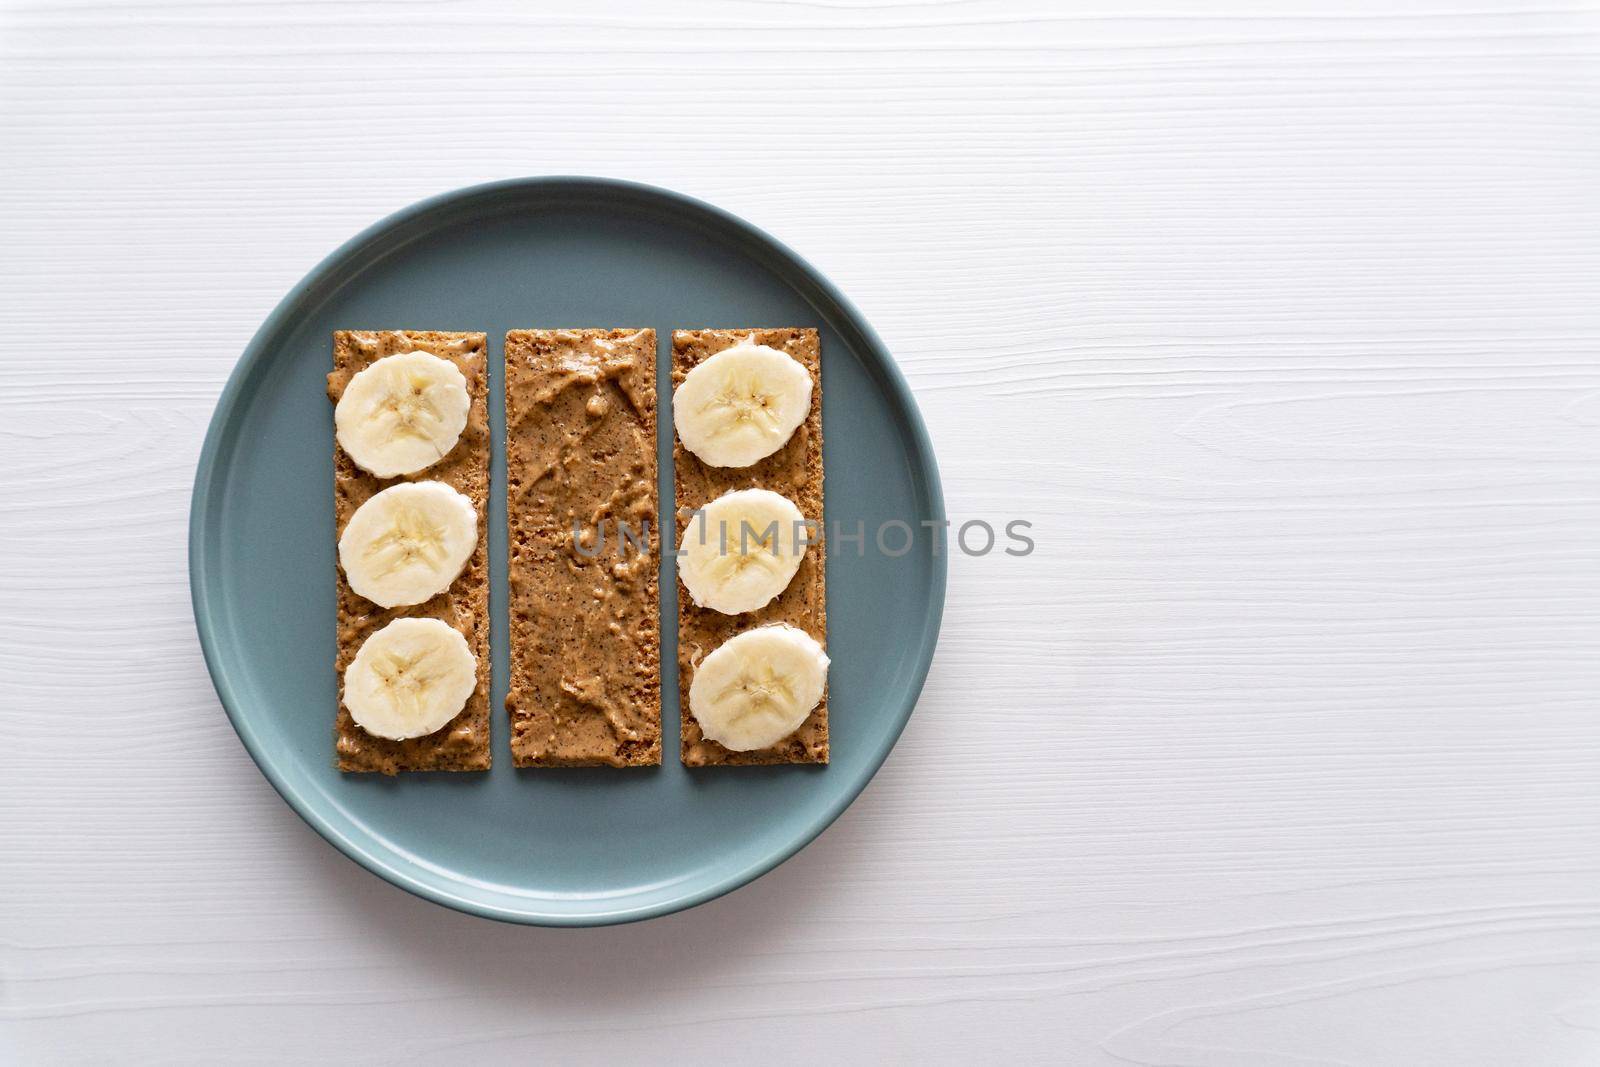 Peanut butter toast with banana by uveita